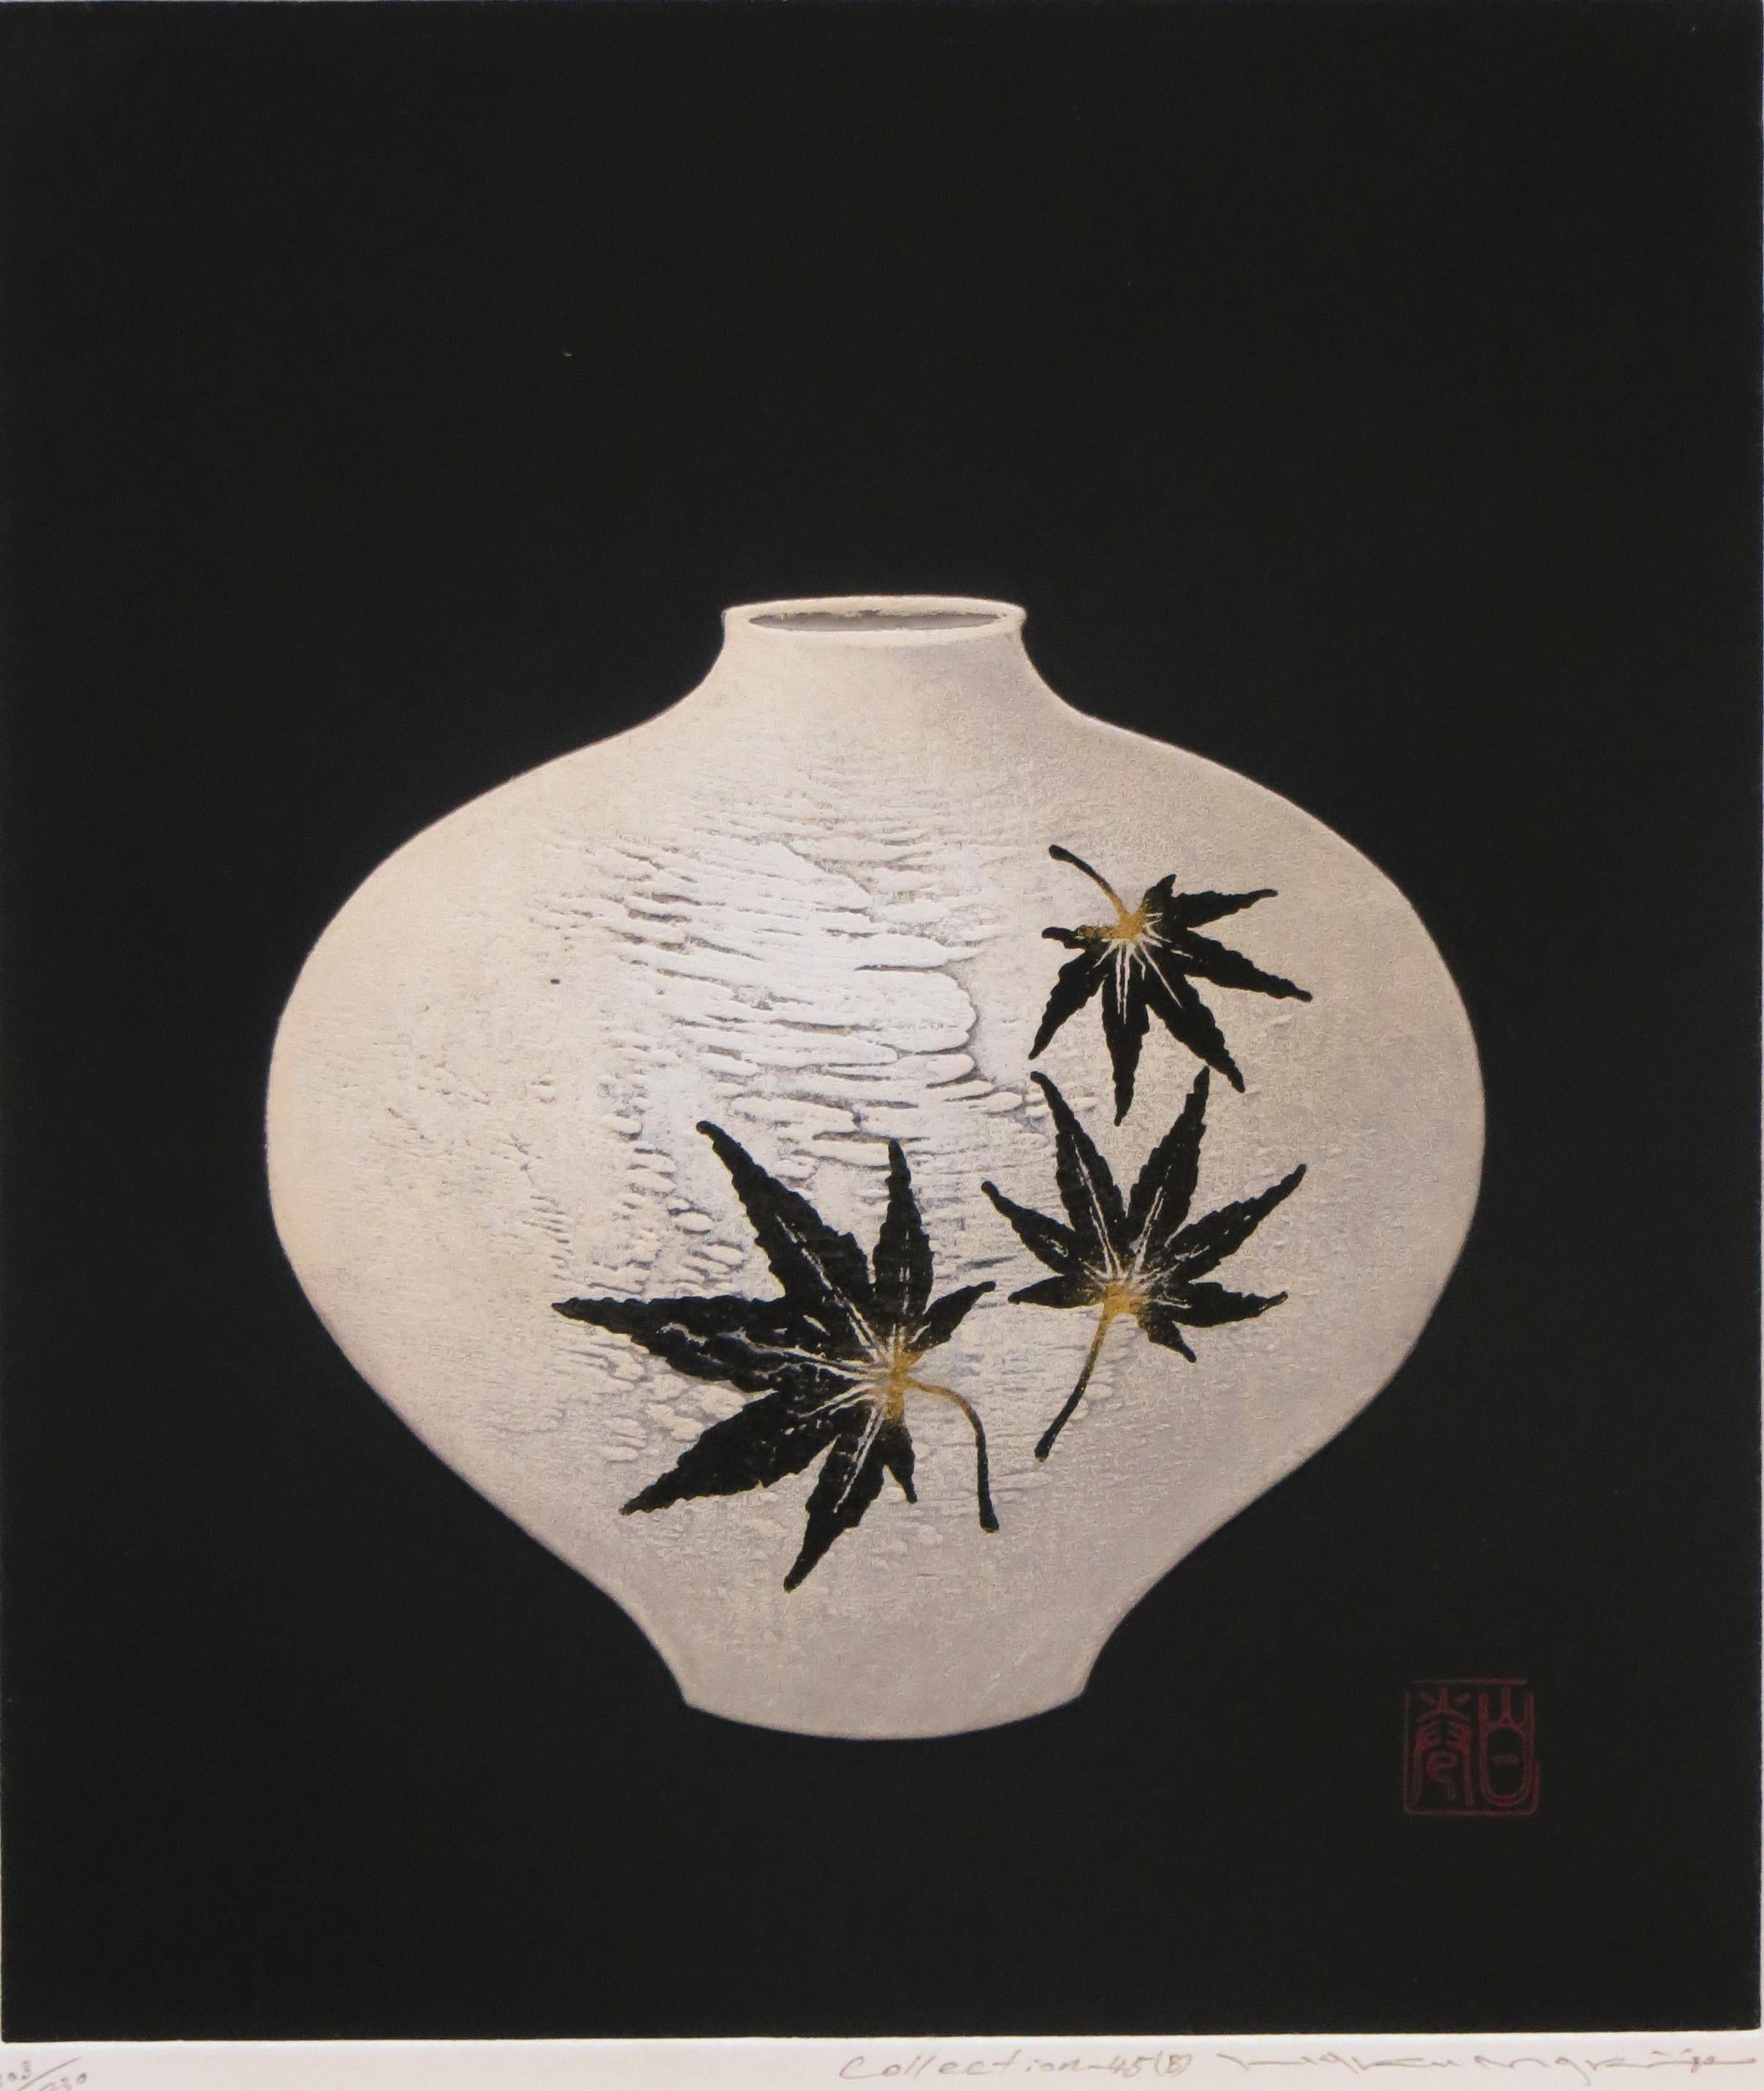 Artist: Haku Maki – Japanese (1924-2000)
Title: Collection 45 (B)
Year: 1980
Medium: Woodblock
Edition: 203/230
Sight size: 9.125 x 8 inches. 
Sheet size: 10.75 x 9.5 inches
Framed size: 16.25 x 14.75 inches 
Signature: Signed lower right
Condition: